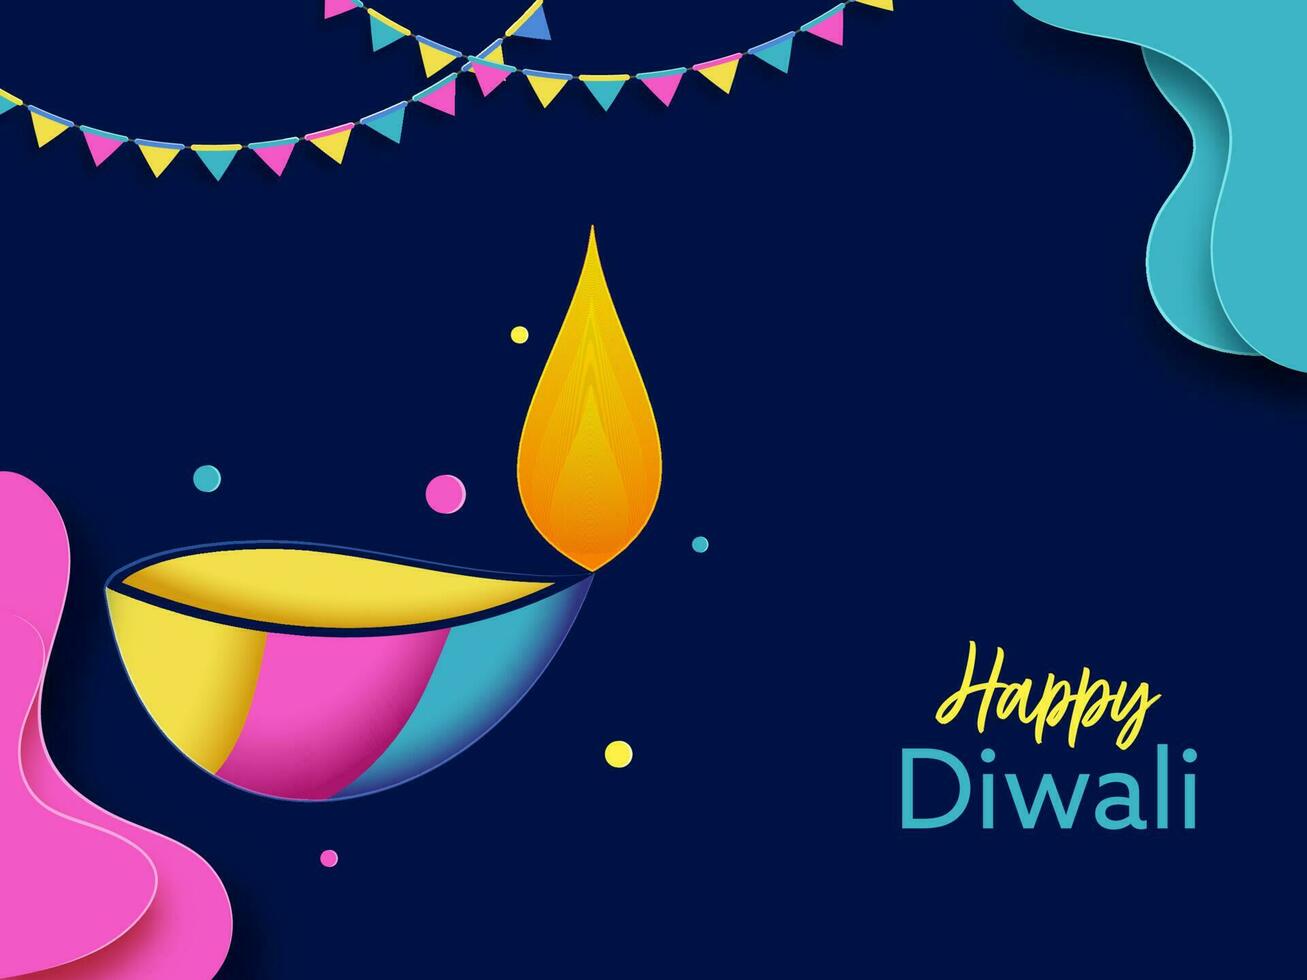 Indian Light Festival, Happy Diwali Celebration Concept with Colorful Lit Oil Lamps, Bunting Flags And Paper Cut Waves On Blue Background. vector